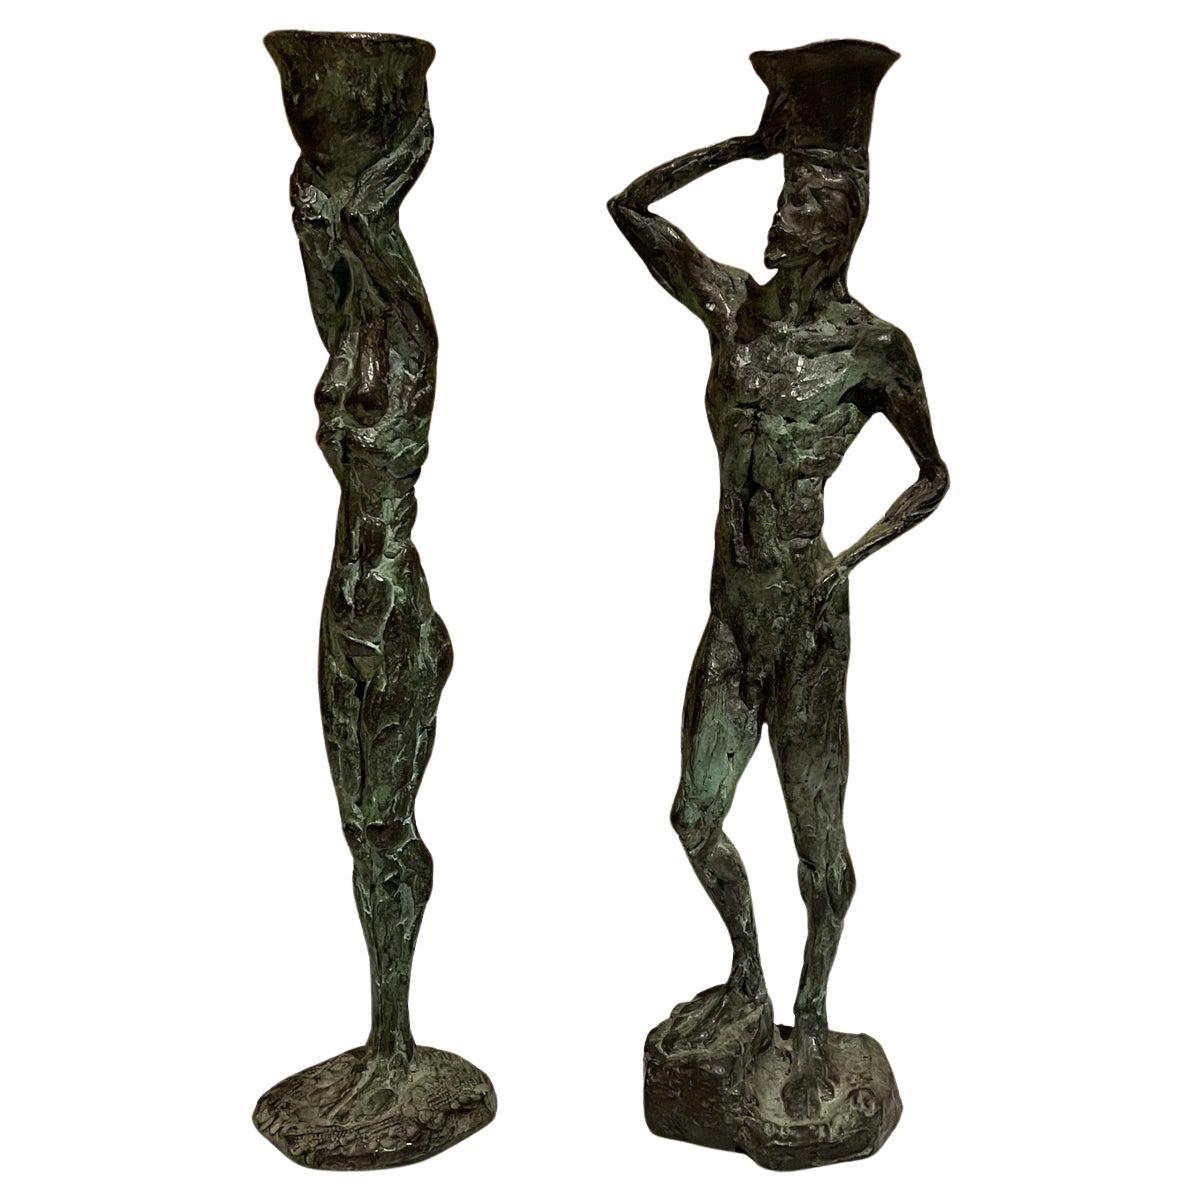 1960s A. Moreno Sculpture Bronze Figure Candleholders in Style of Giacometti